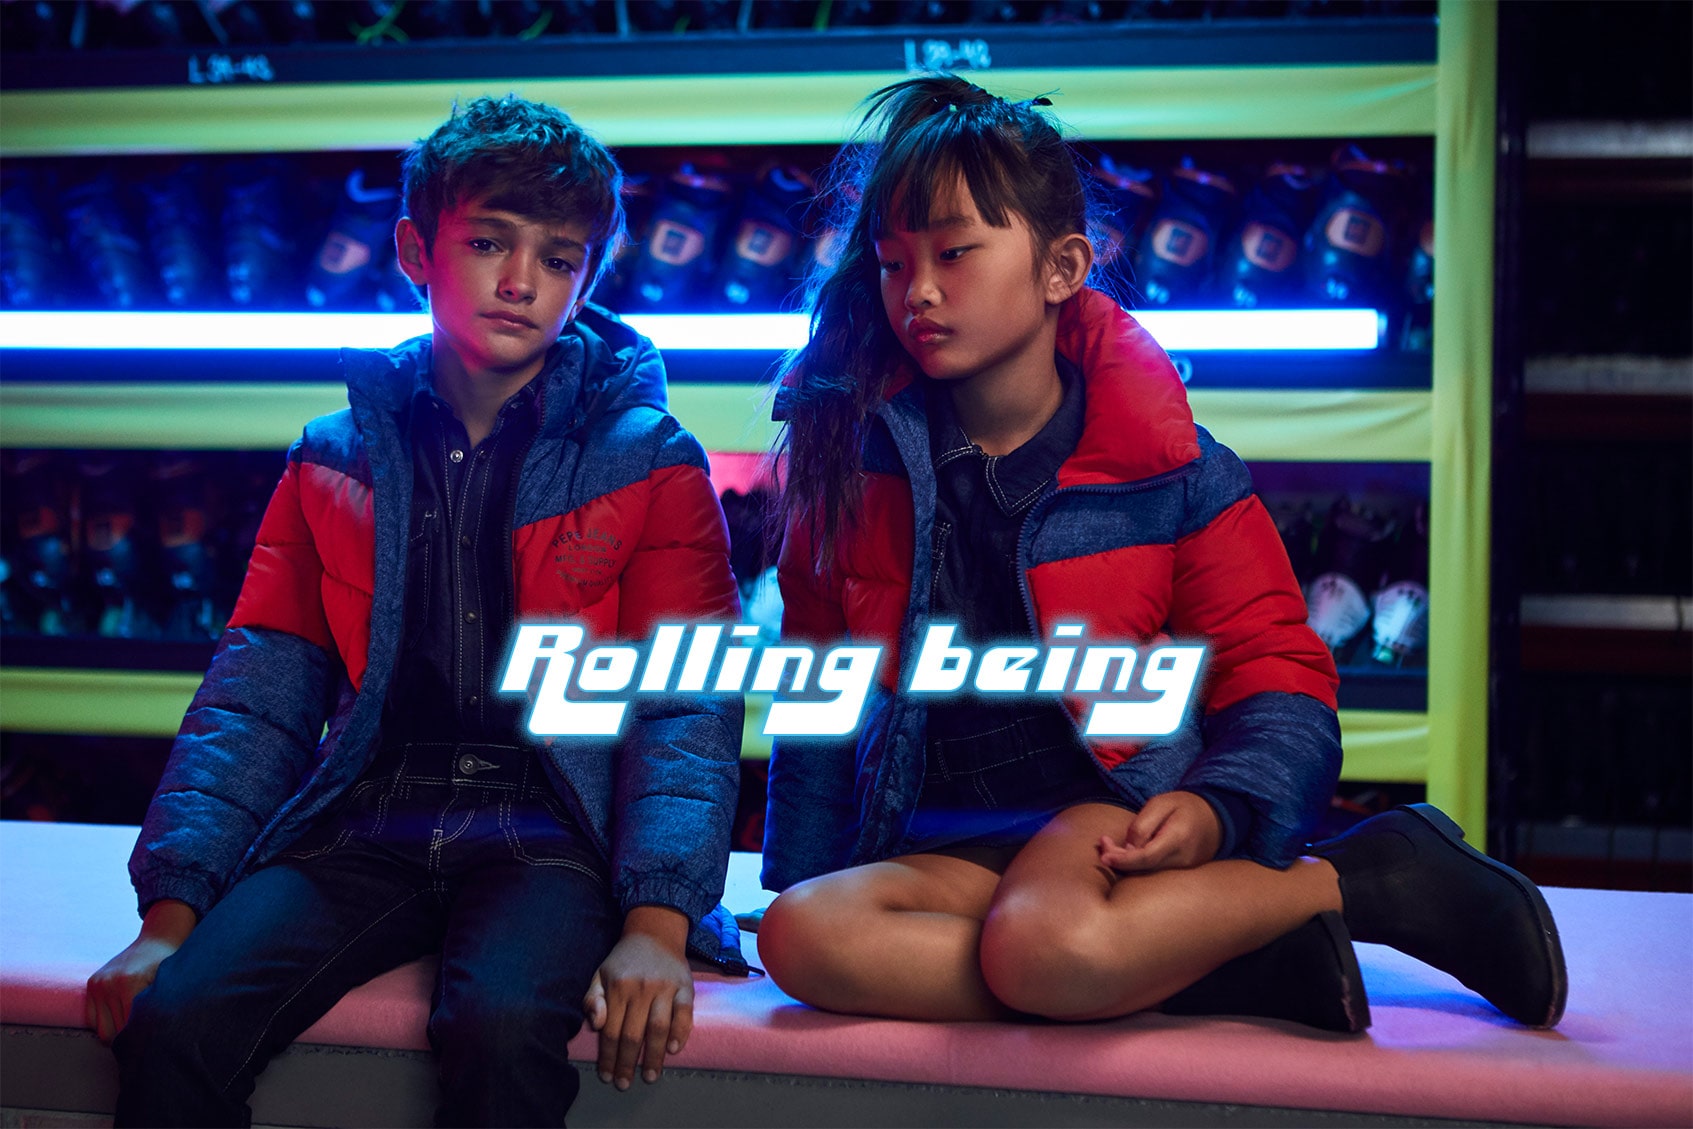 Rolling Being - Junior New In